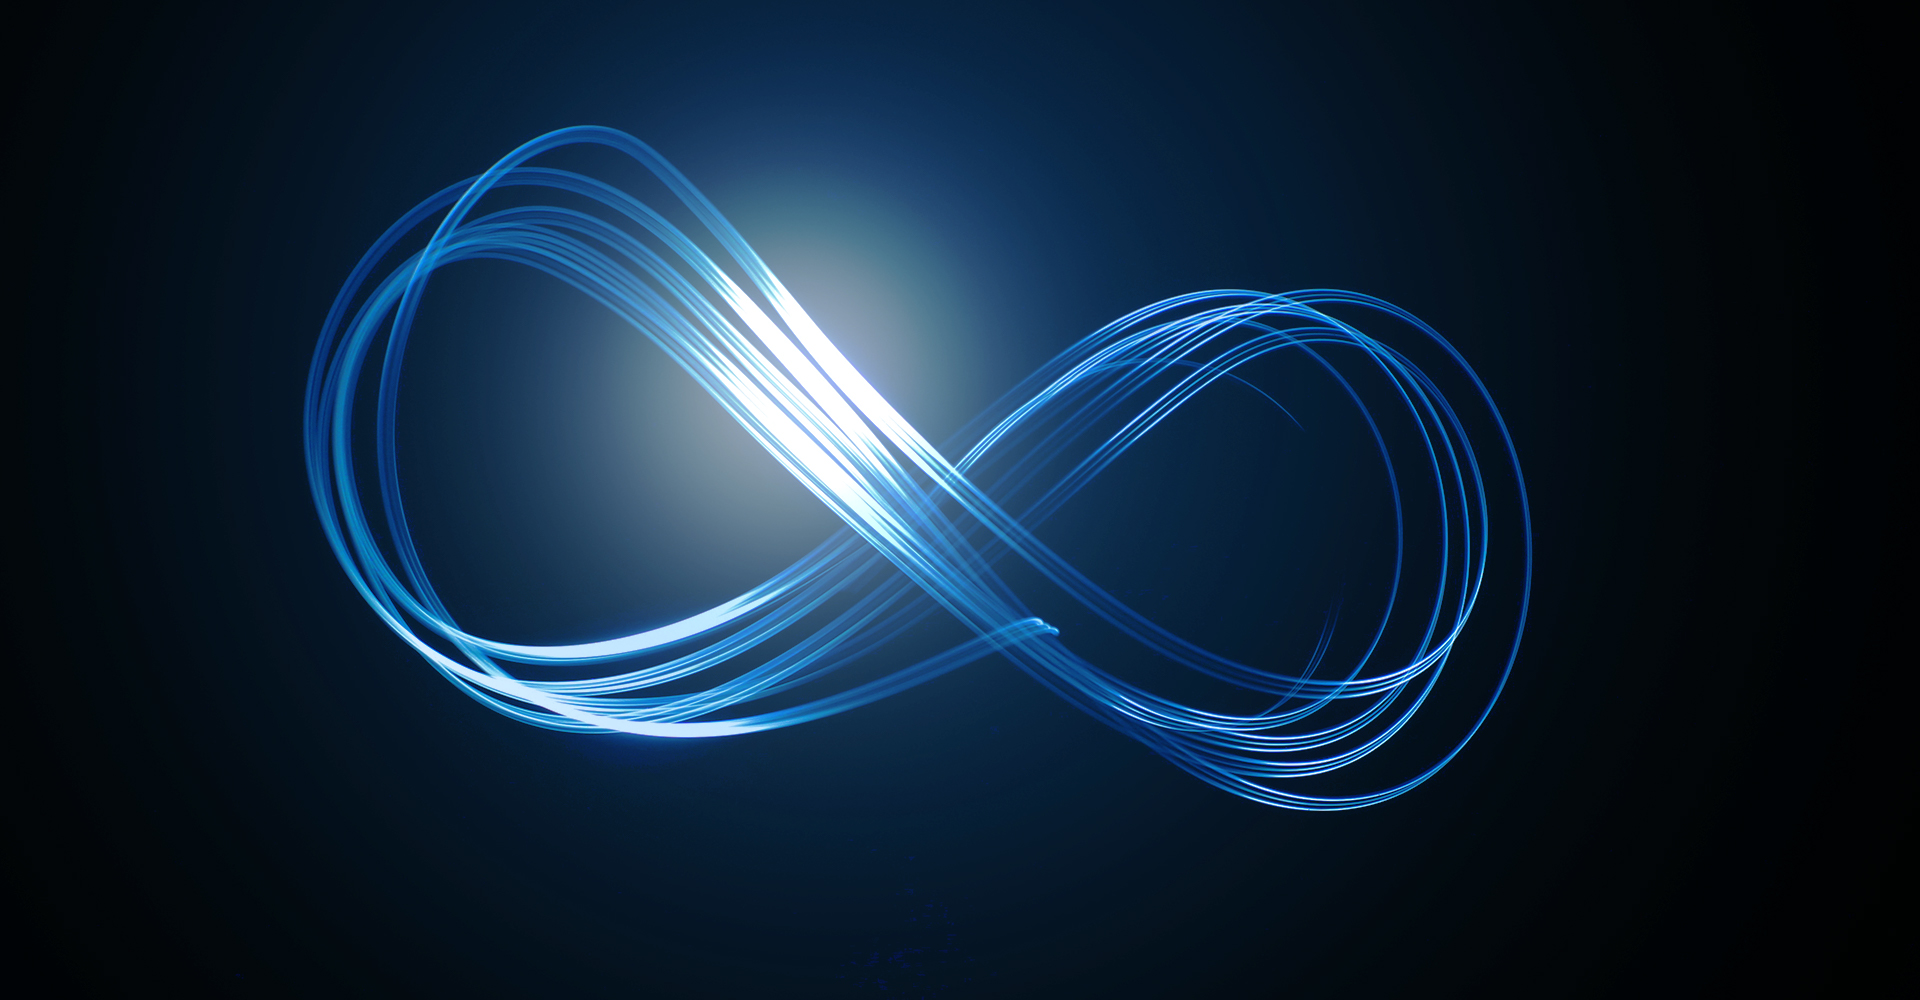 An infinity loop drawn with light. 